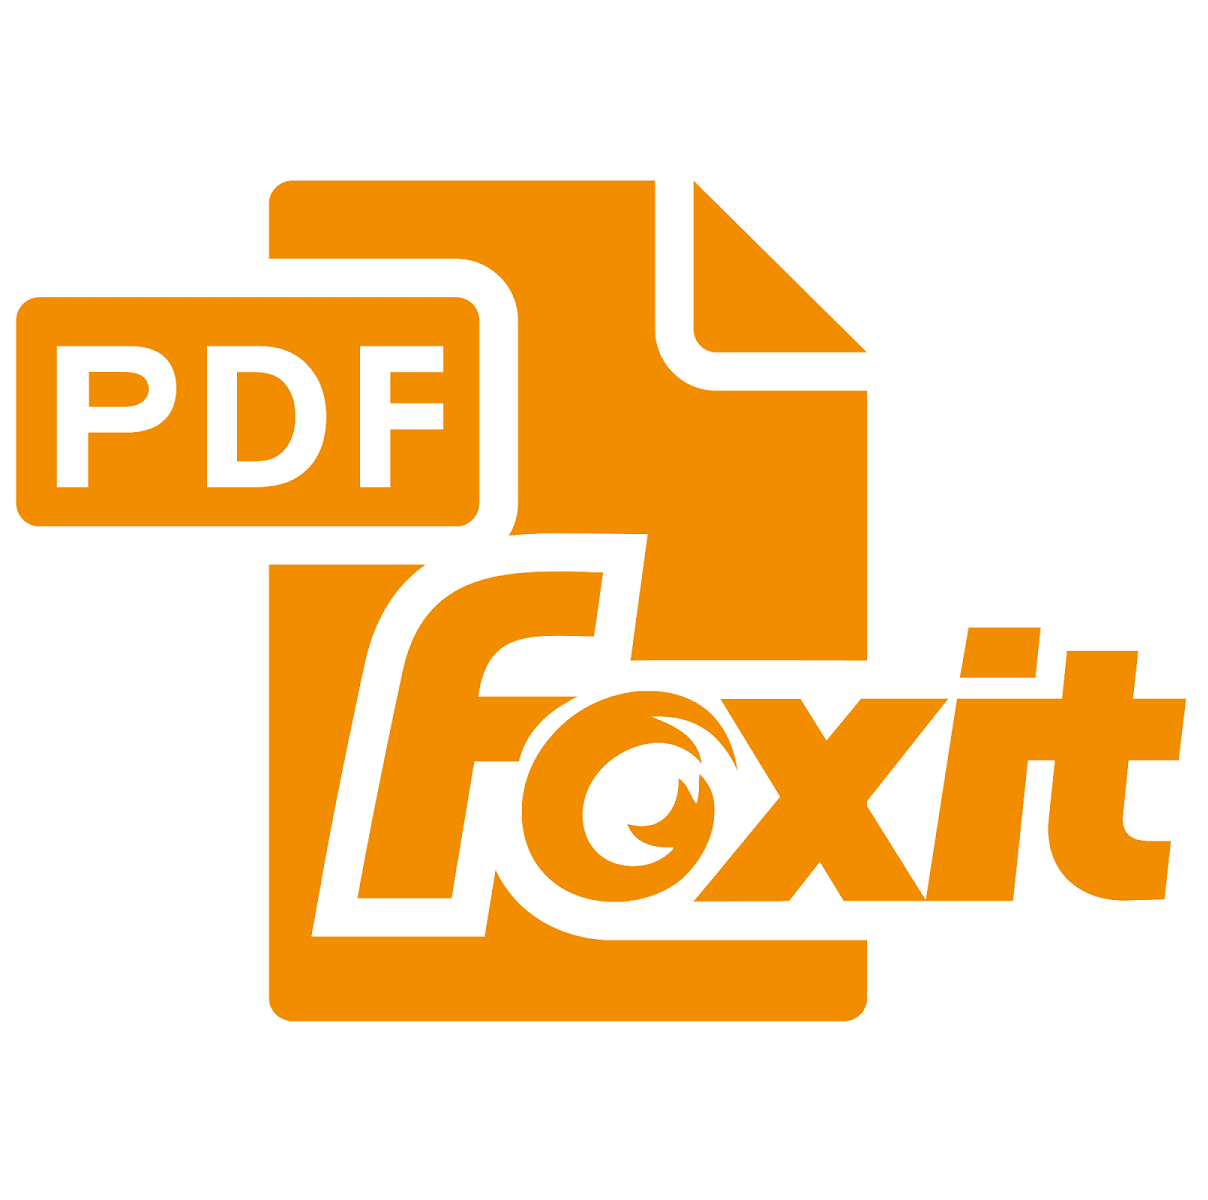 Download Foxit Reader for Windows 11, 10